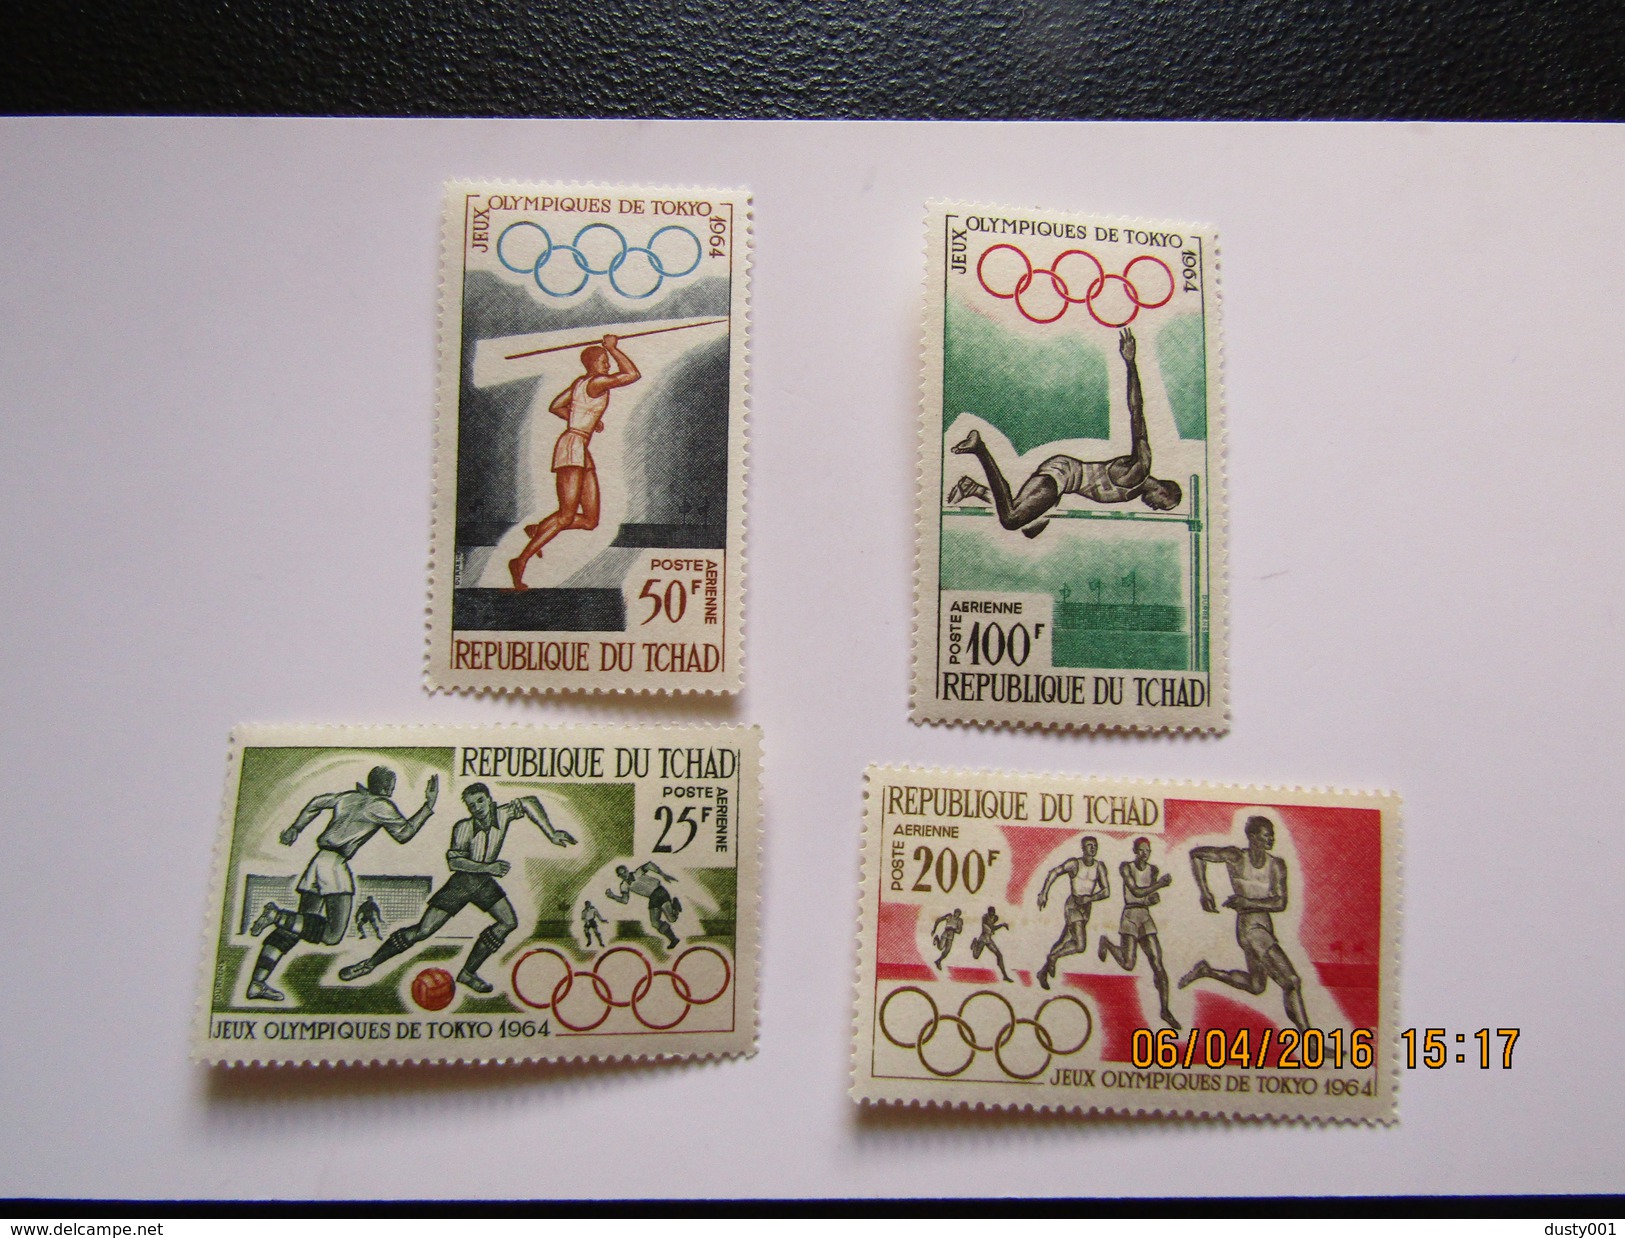 JO133    Olympiques  Tokyo  Olympic Games   Chad    MNH - Ete 1964: Tokyo